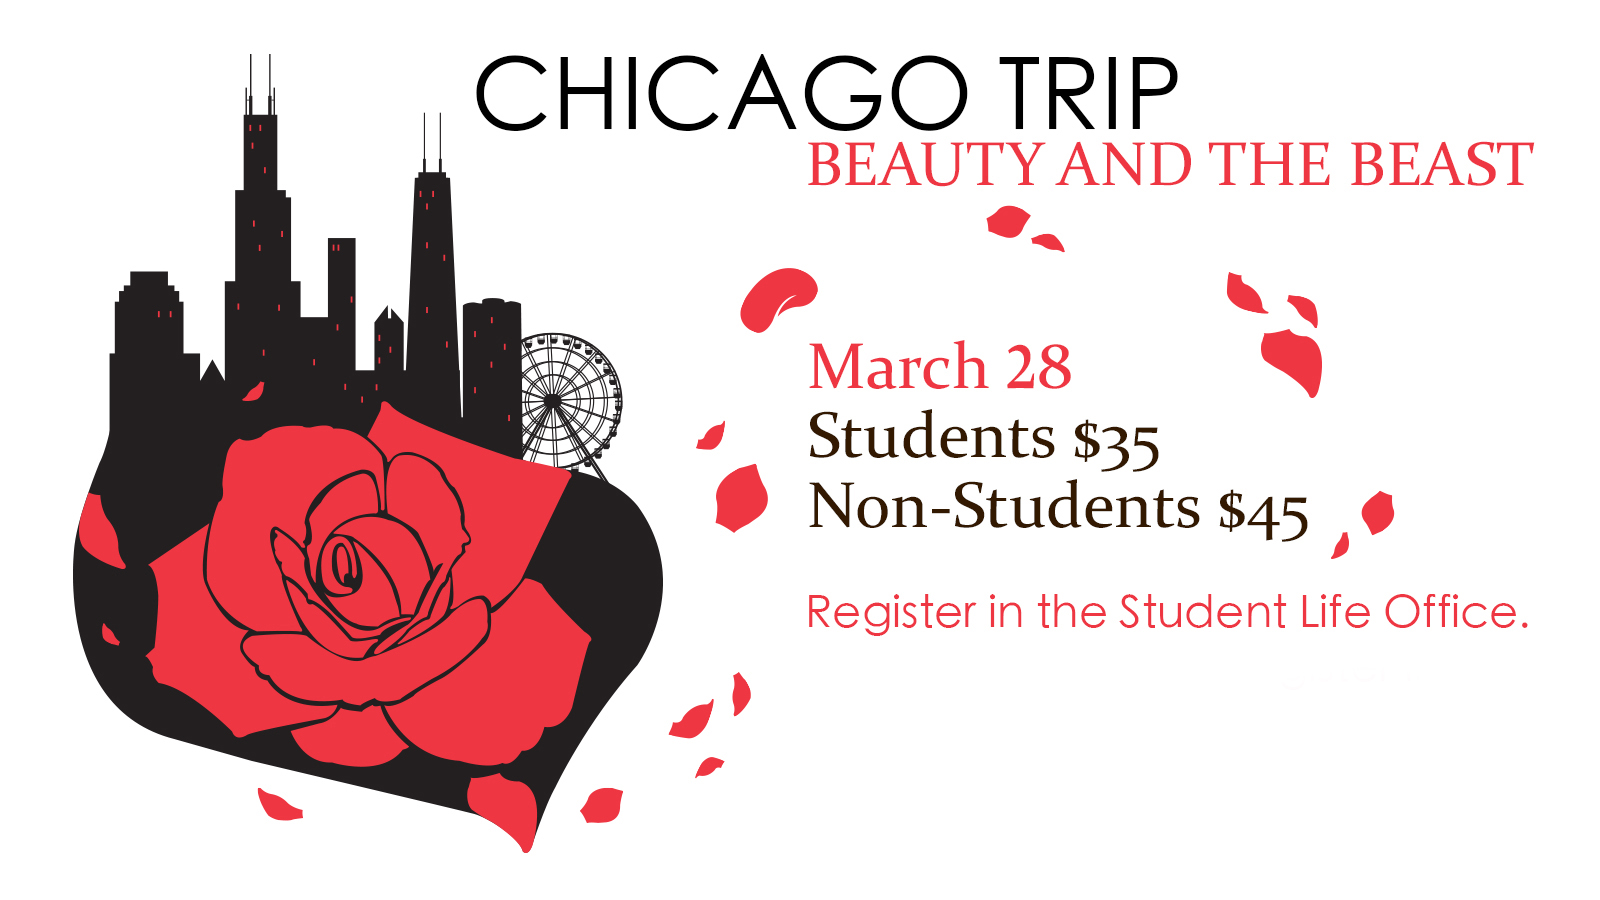 A text and graphic slide promoting KCC's upcoming trip to Chicago to take students to see "Beauty and the Beast"